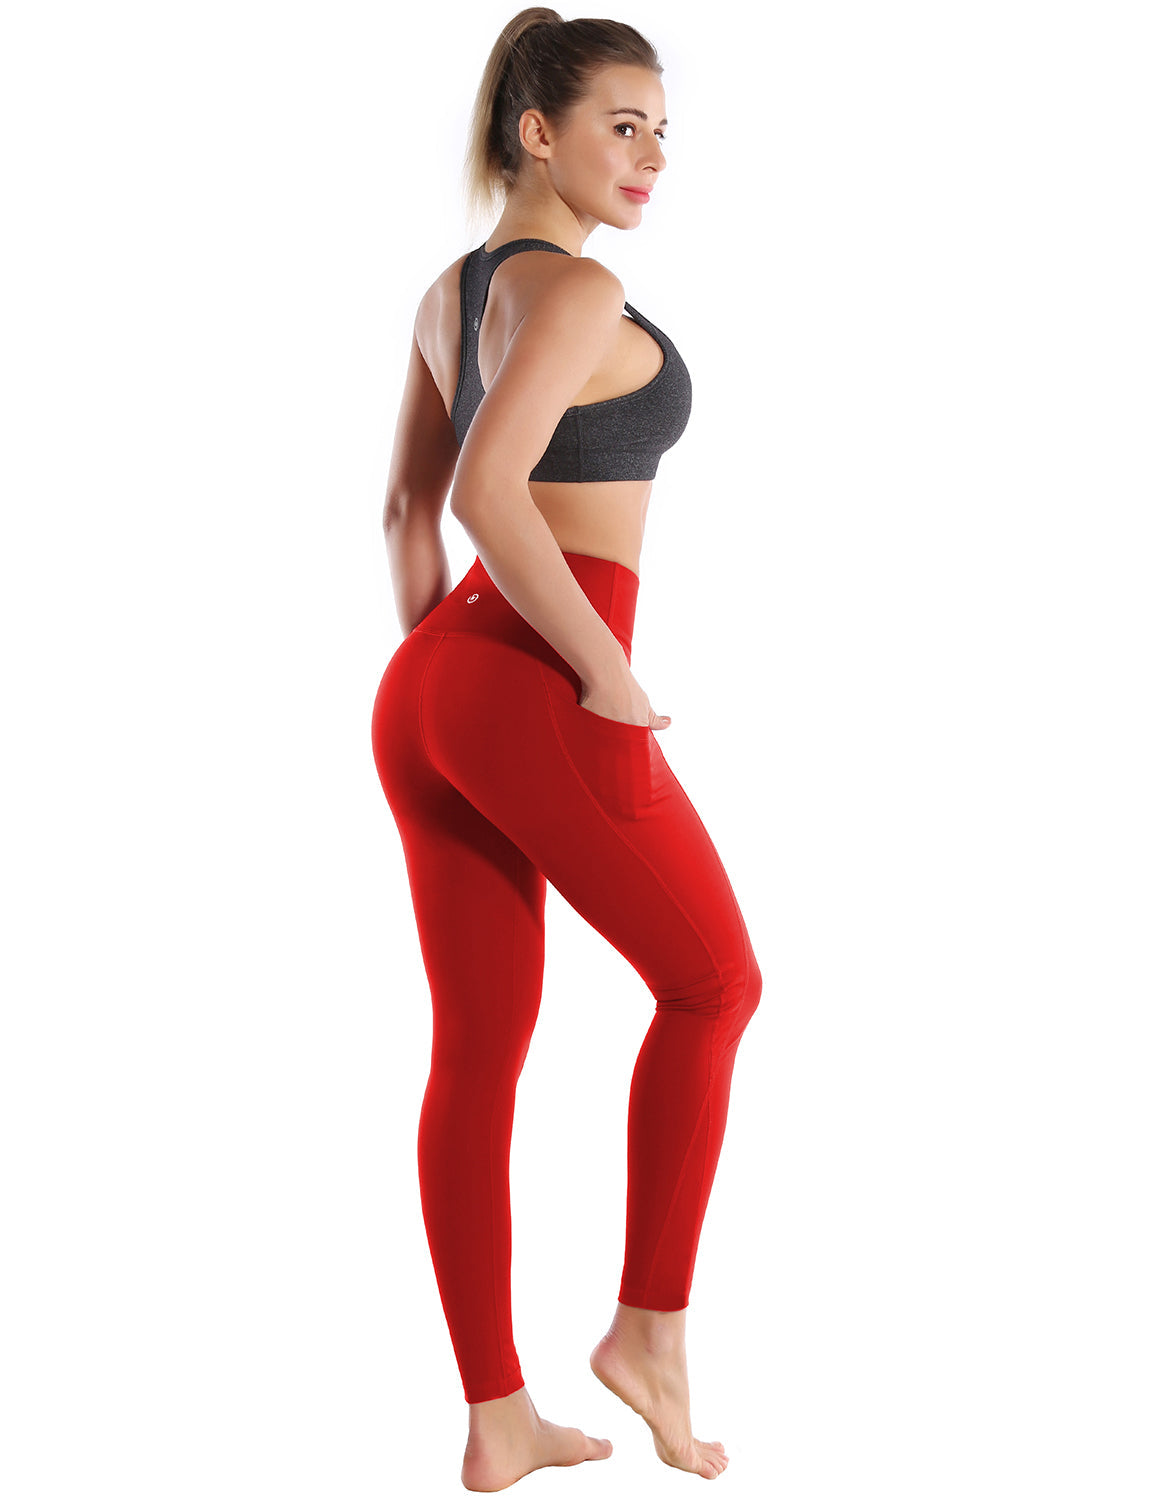 High Waist Side Pockets Golf Pants scarlet 75% Nylon, 25% Spandex Fabric doesn't attract lint easily 4-way stretch No see-through Moisture-wicking Tummy control Inner pocket